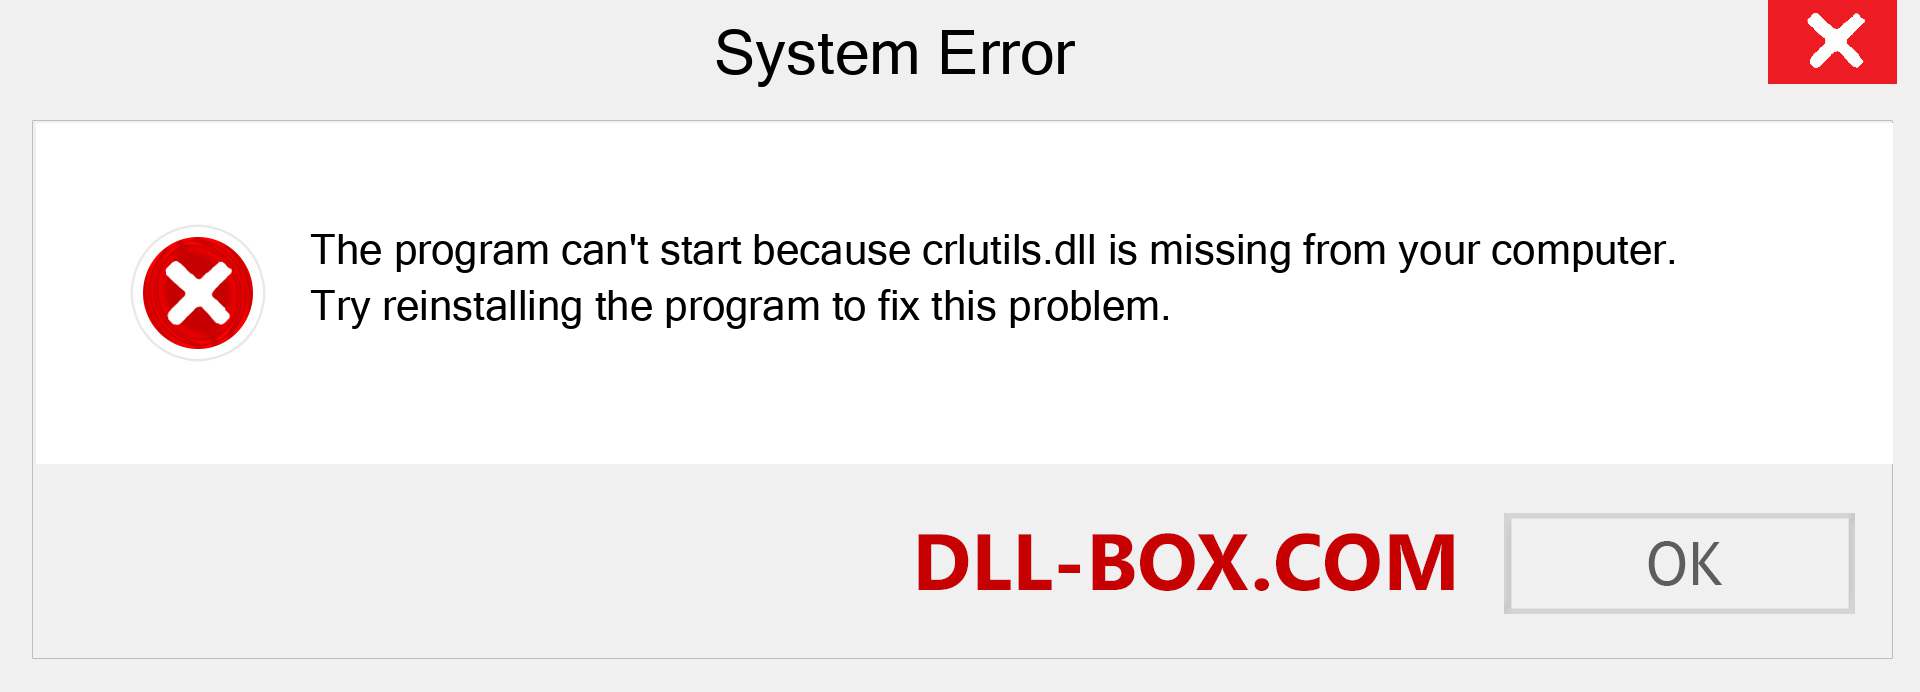  crlutils.dll file is missing?. Download for Windows 7, 8, 10 - Fix  crlutils dll Missing Error on Windows, photos, images